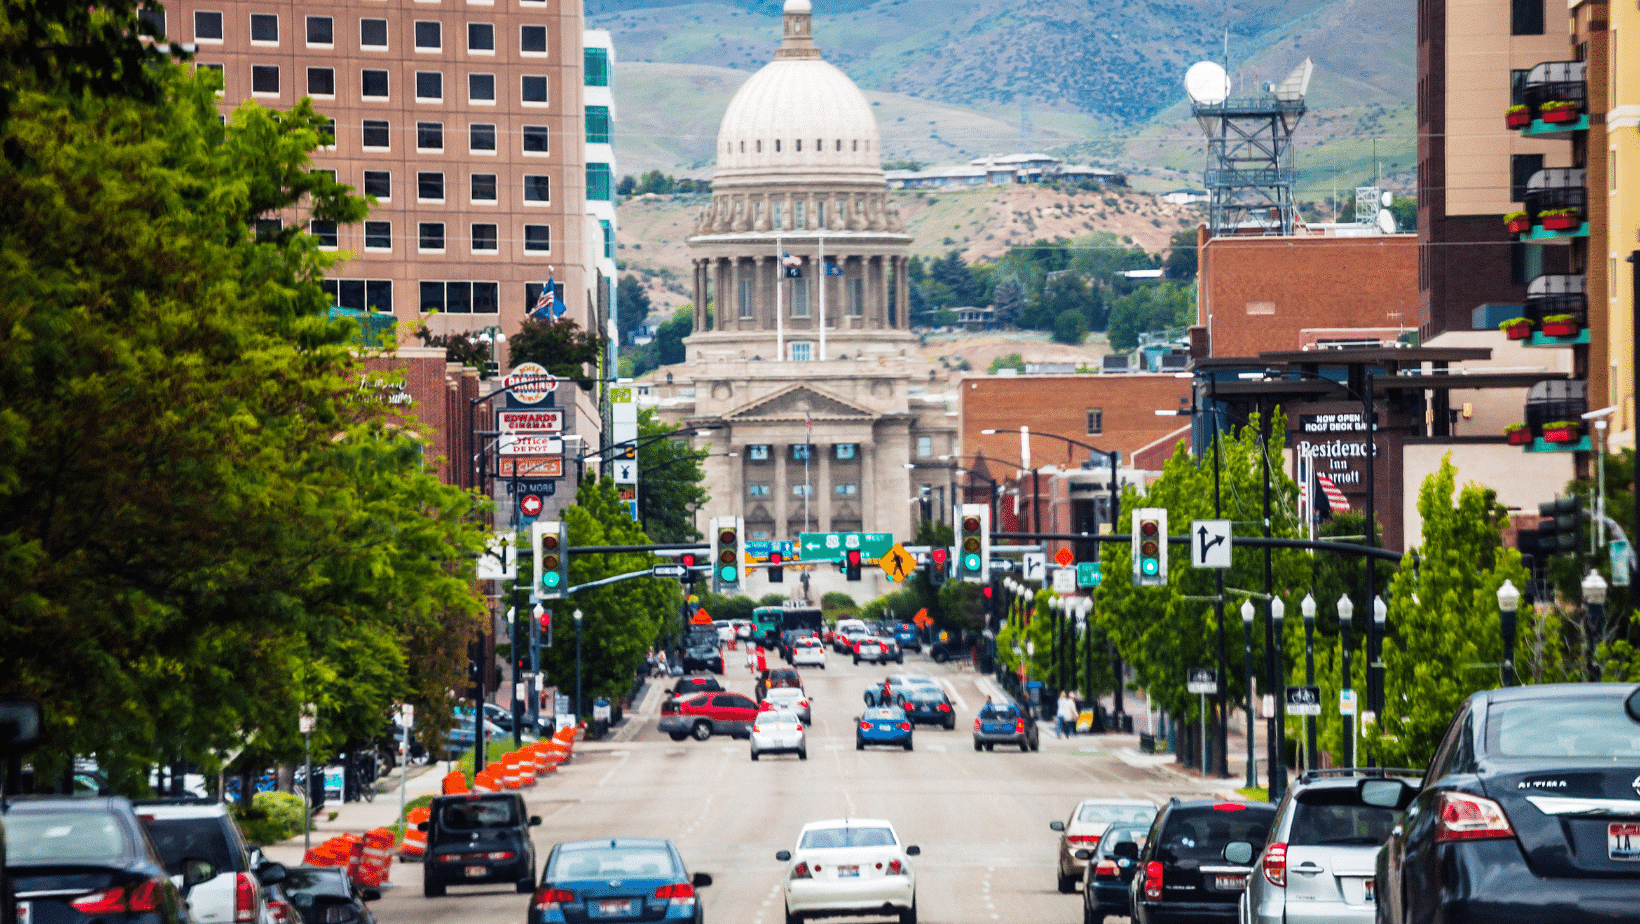 The Boise Capitol Building in center of downtown Boise, Idaho during the day.